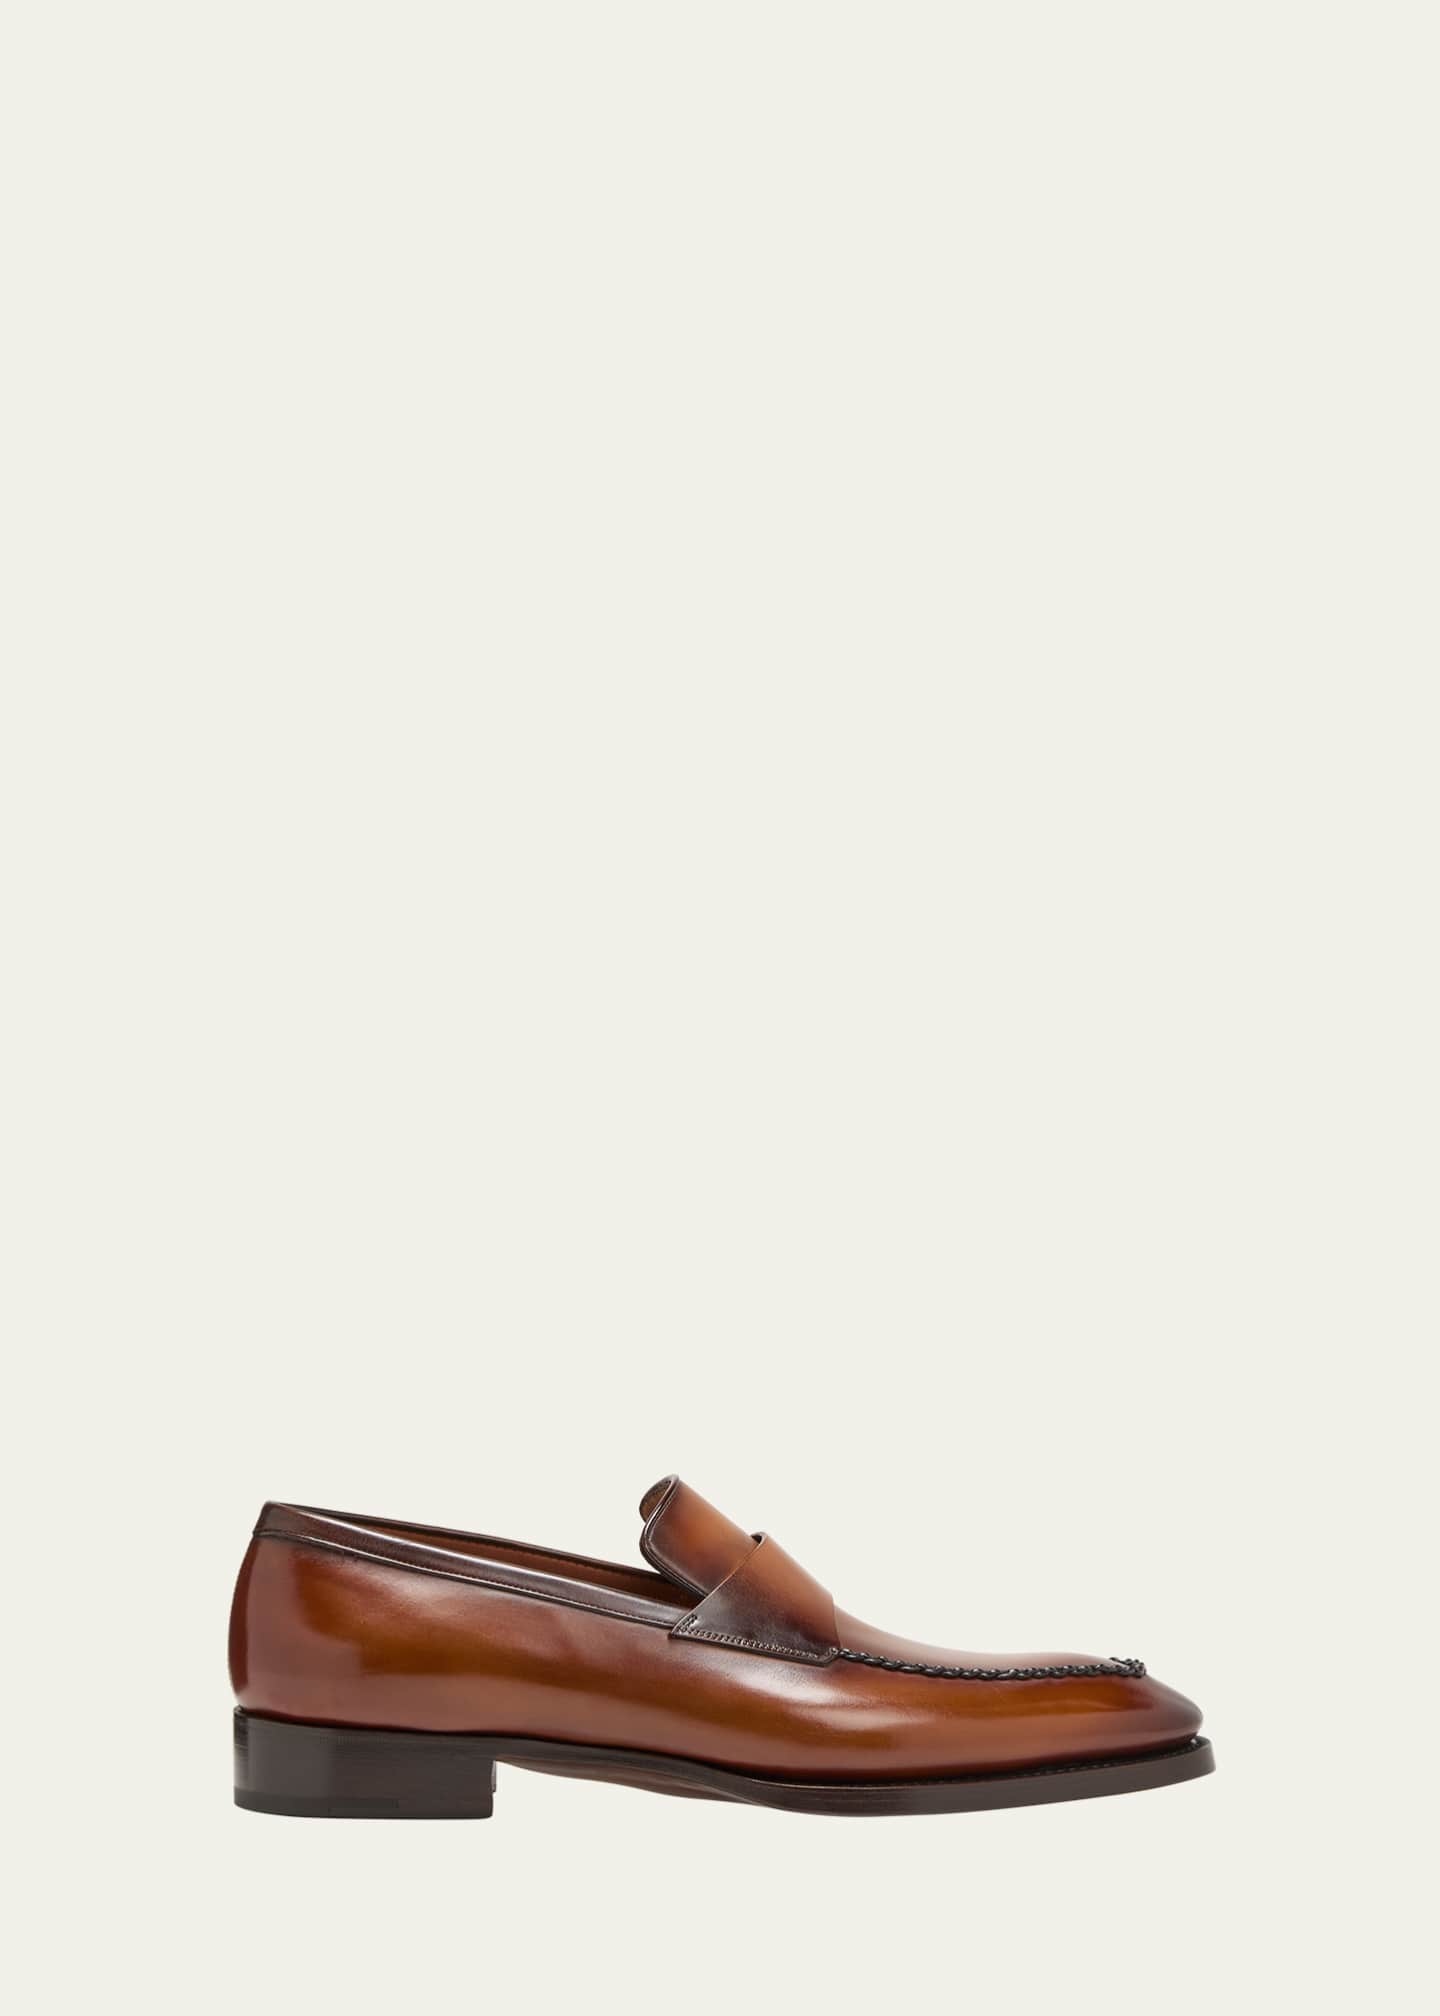 Santoni Men's Limited Edition Pierce Leather Penny Loafers